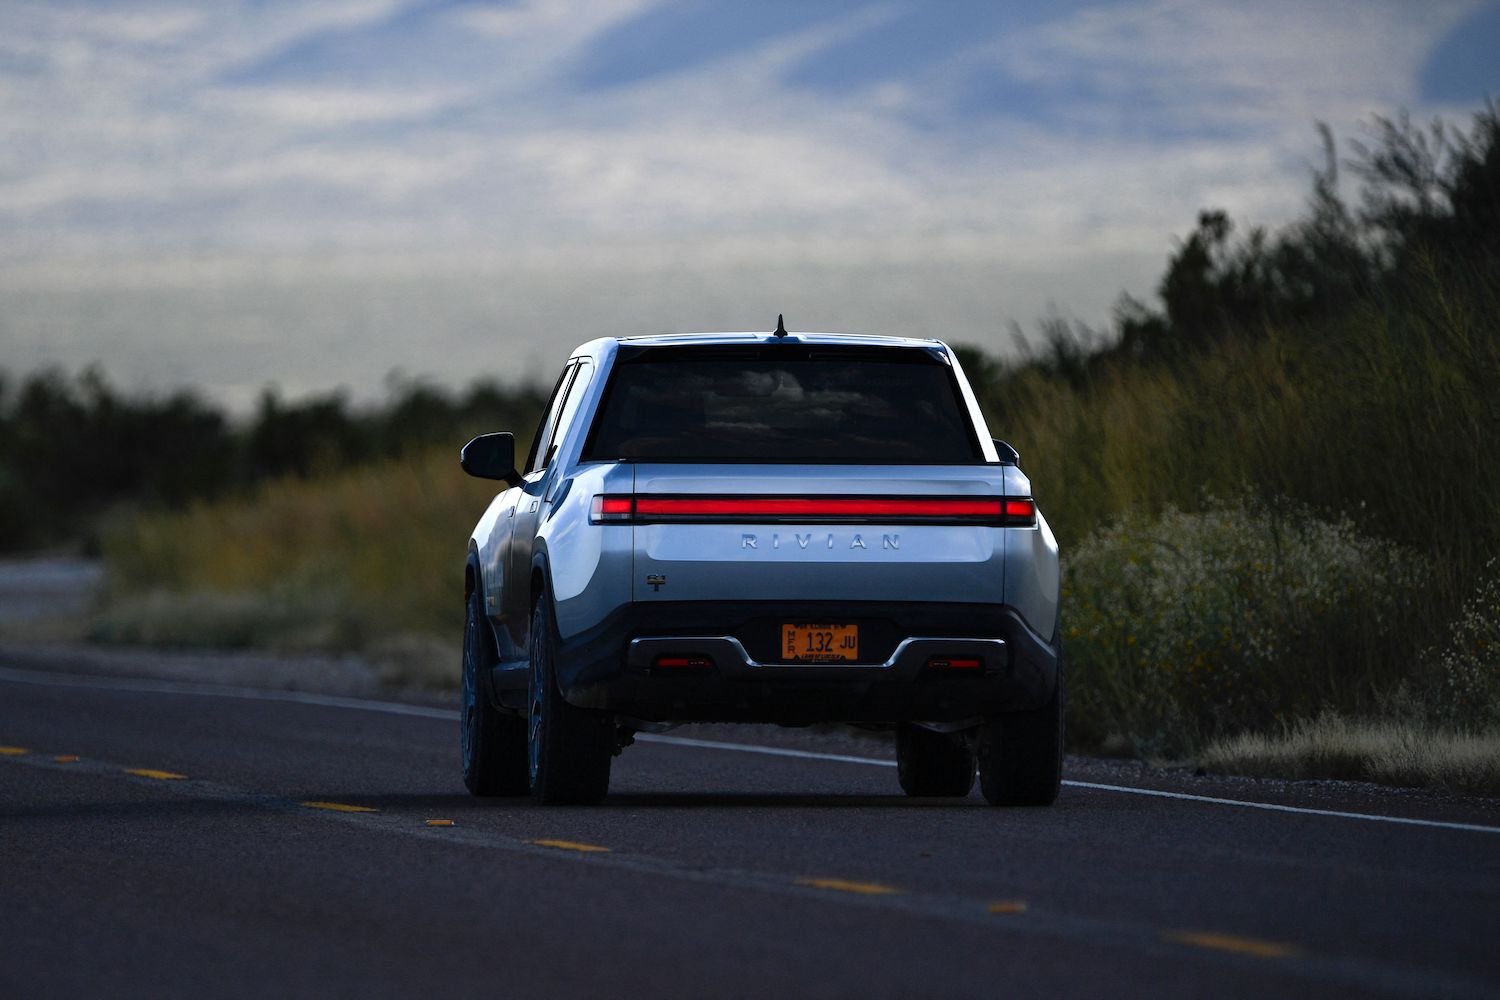 Silver Rivian truck driving away from the camera on a rural highway.